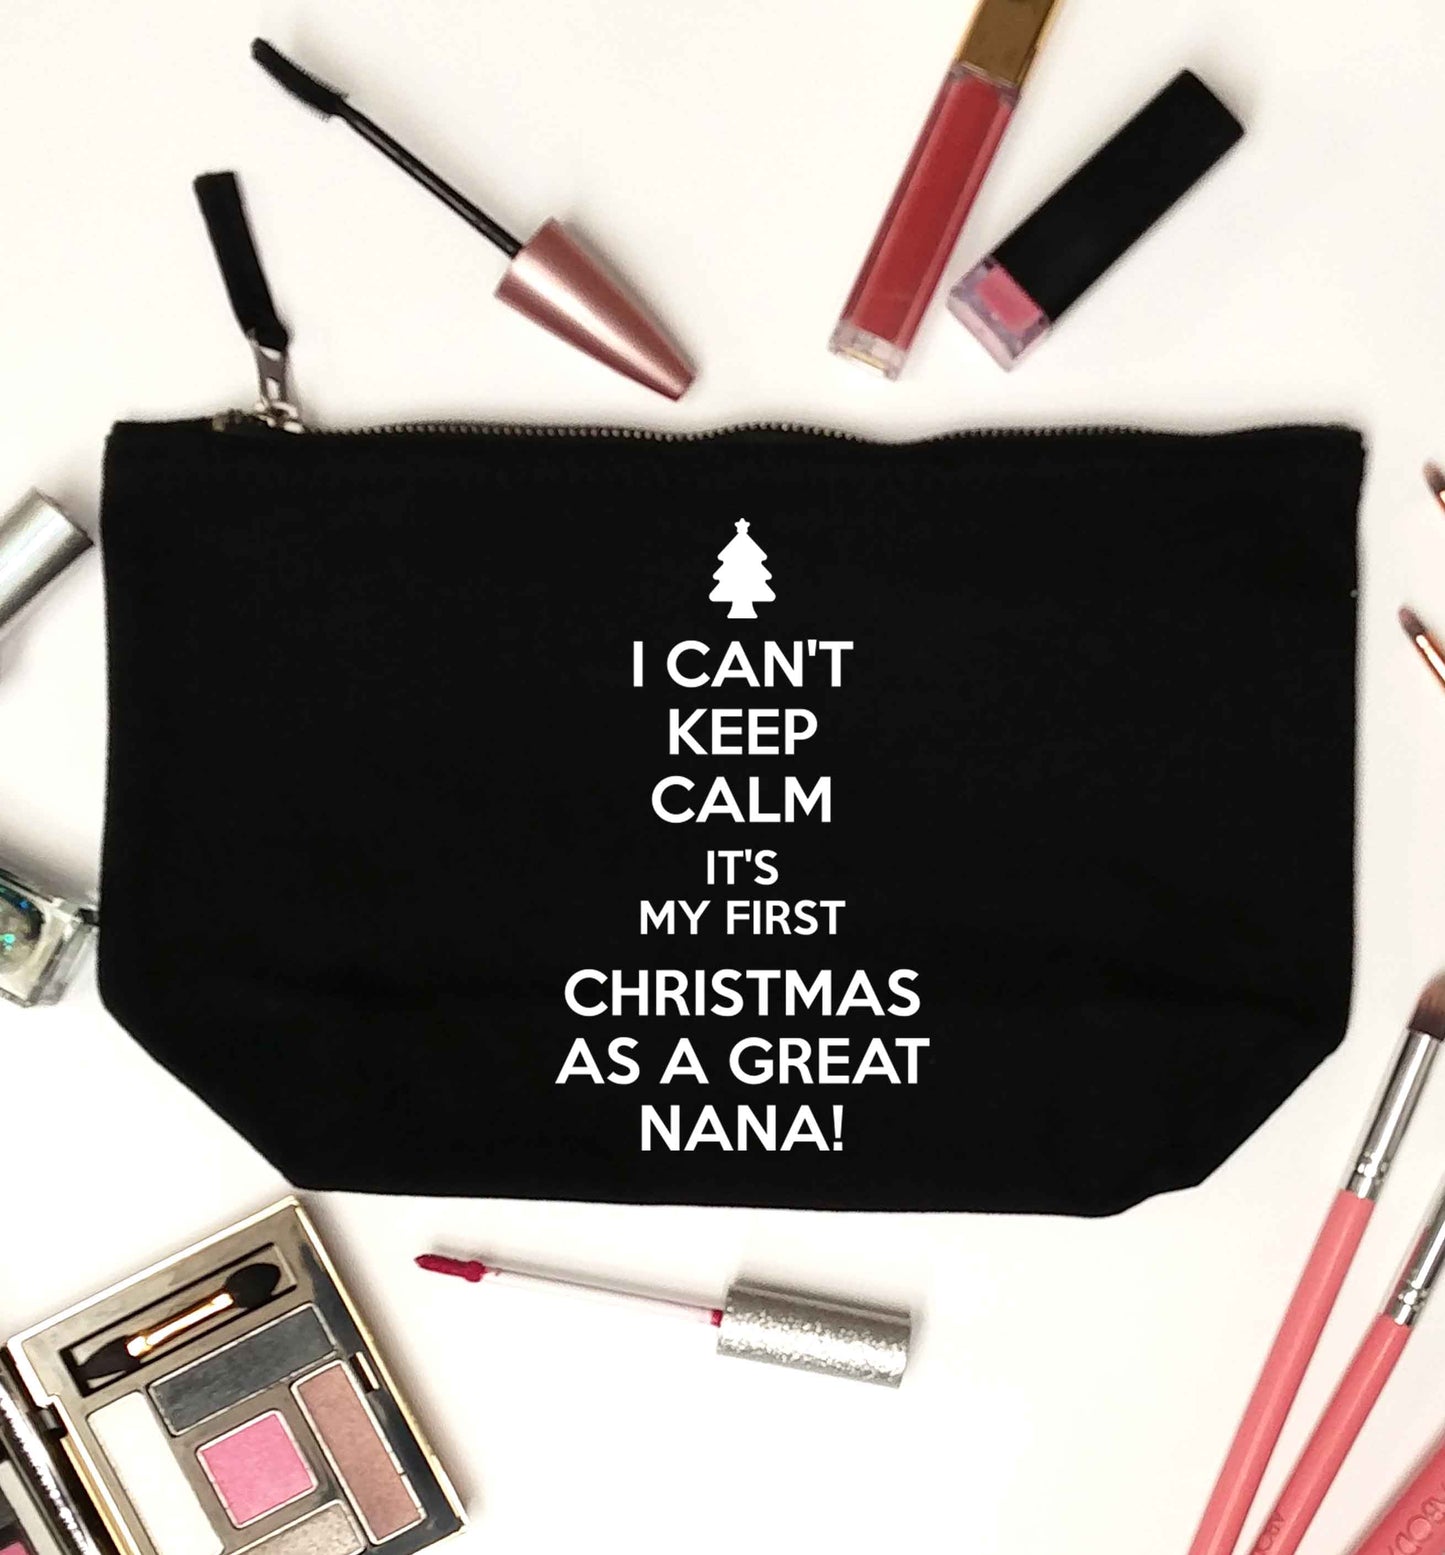 I can't keep calm it's my first Christmas as a great nana! black makeup bag